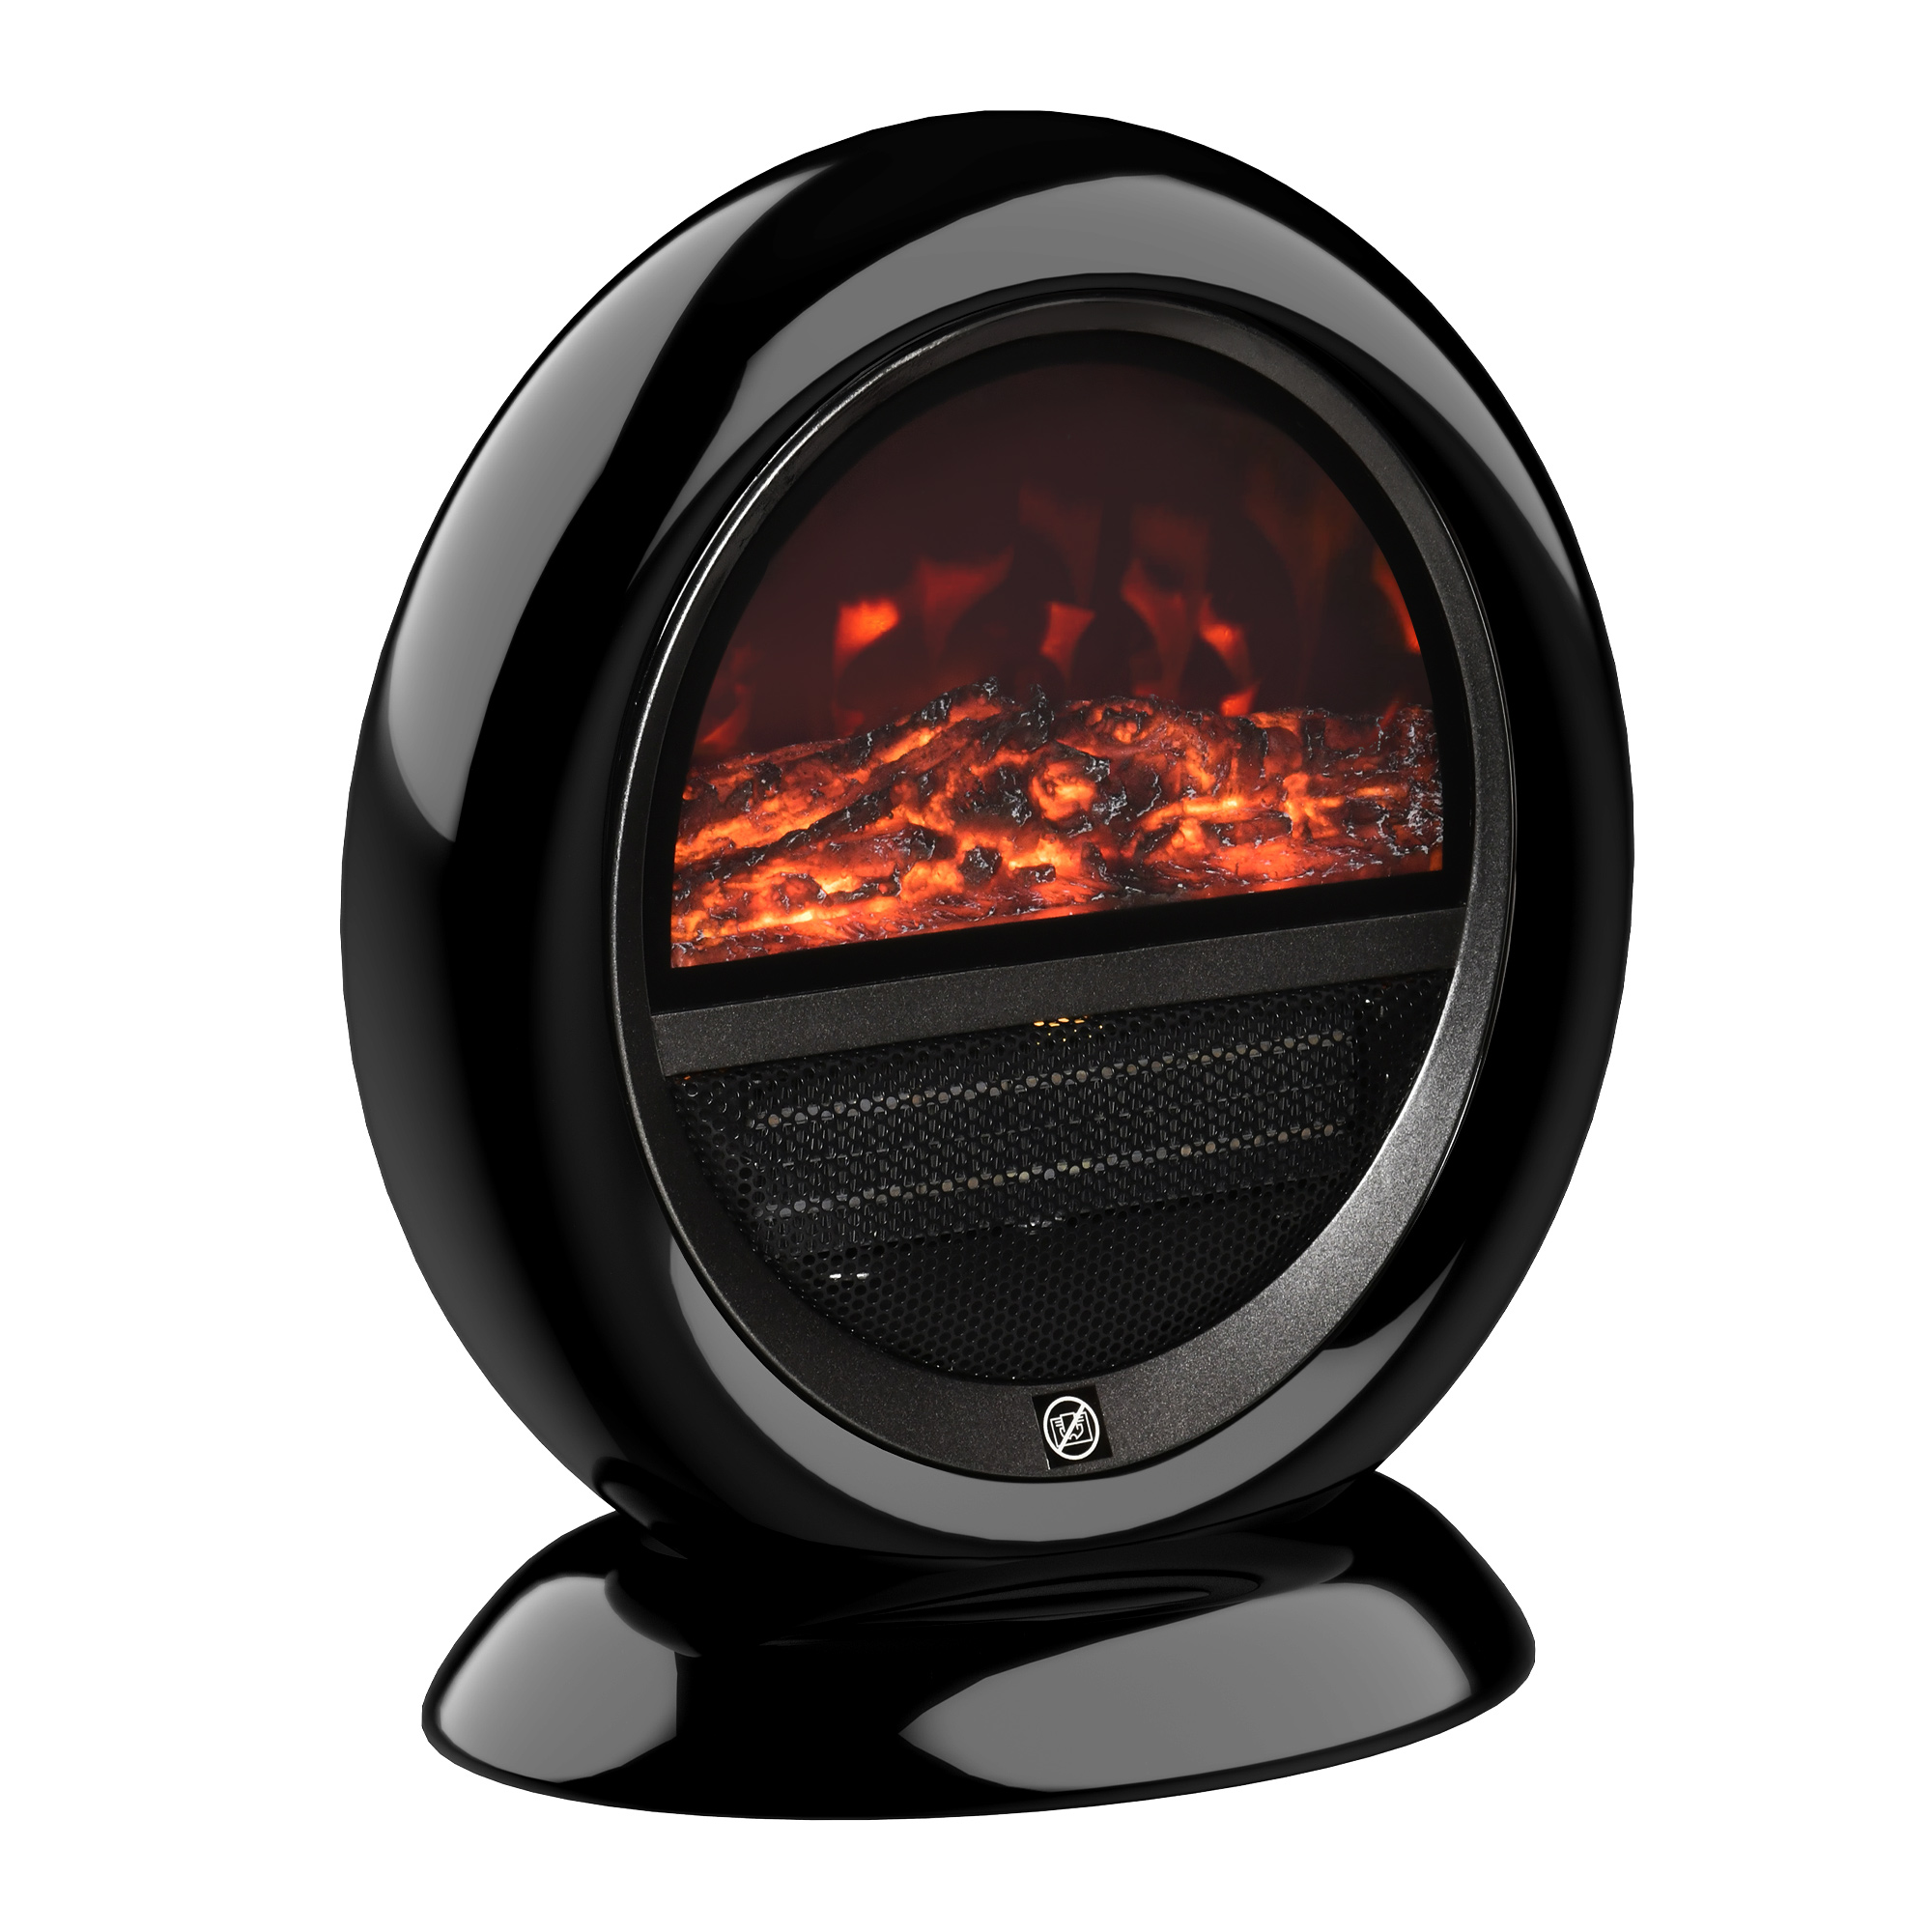 Flame effect Heater